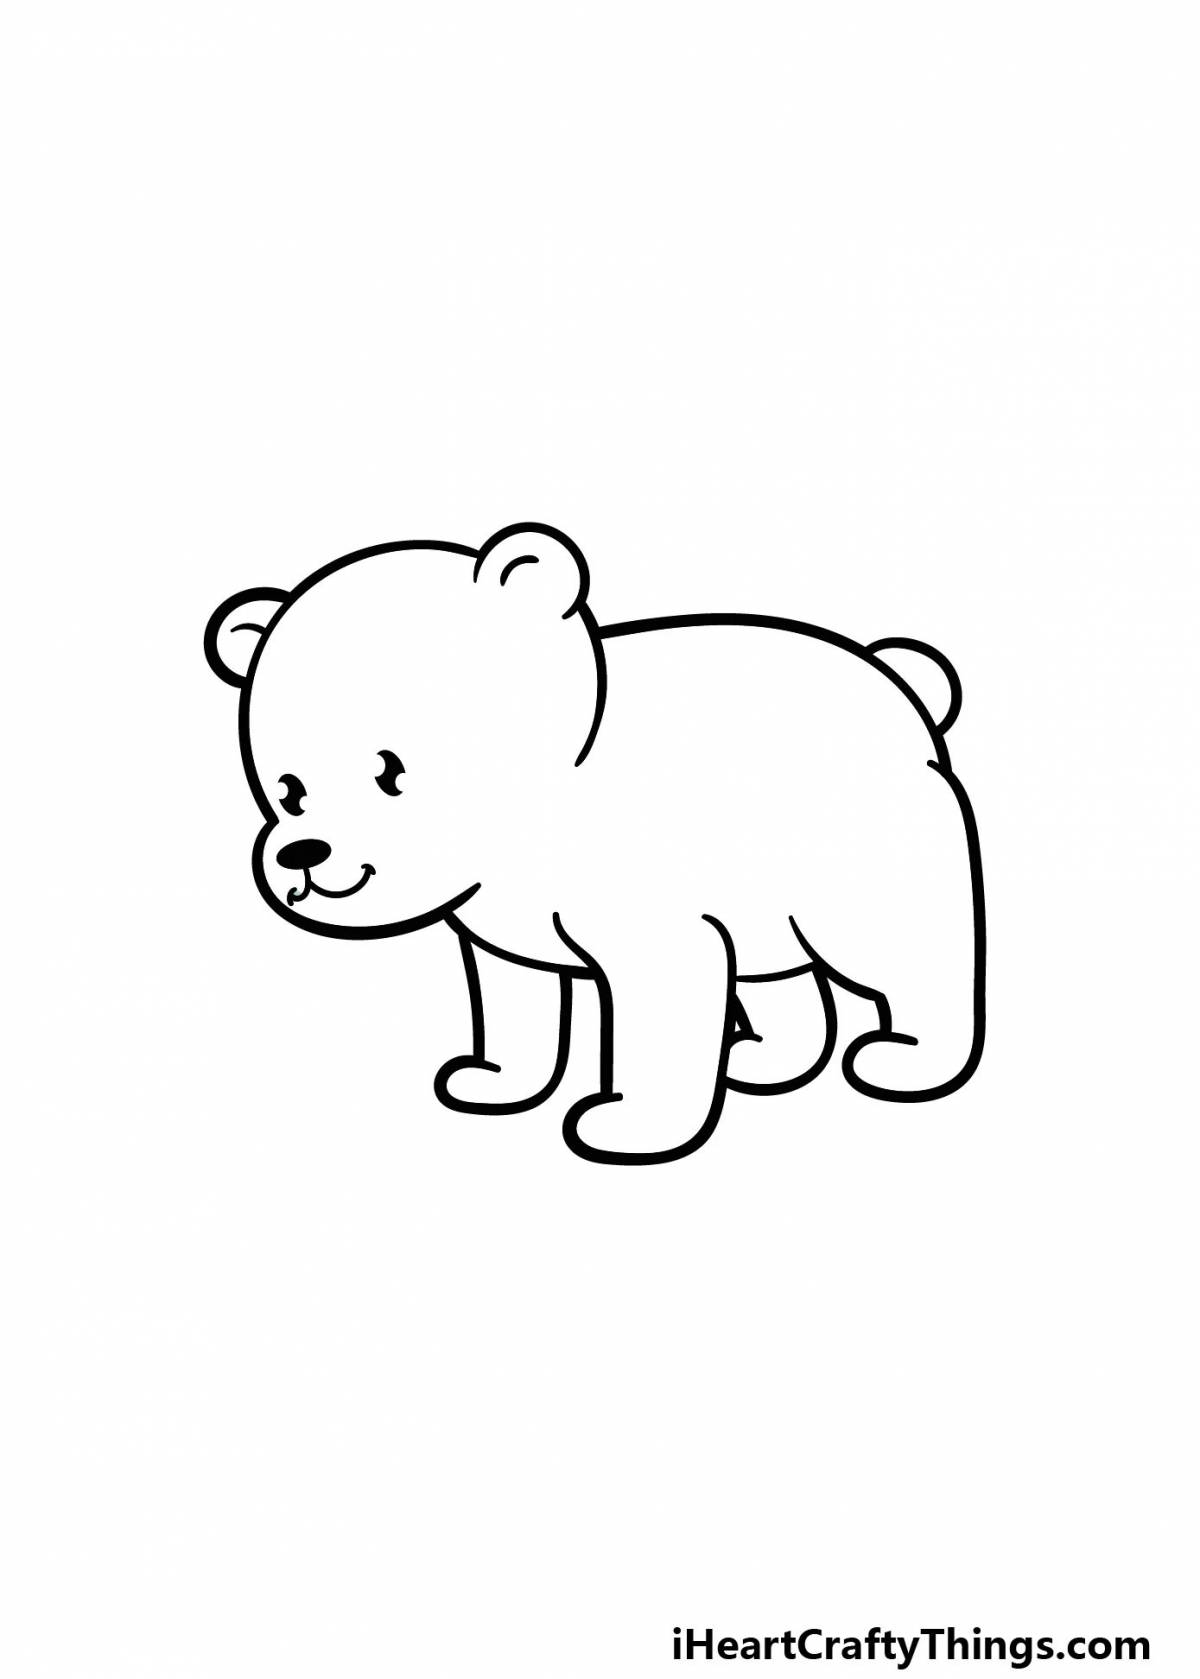 Coloring book funny polar bear for children 3-4 years old